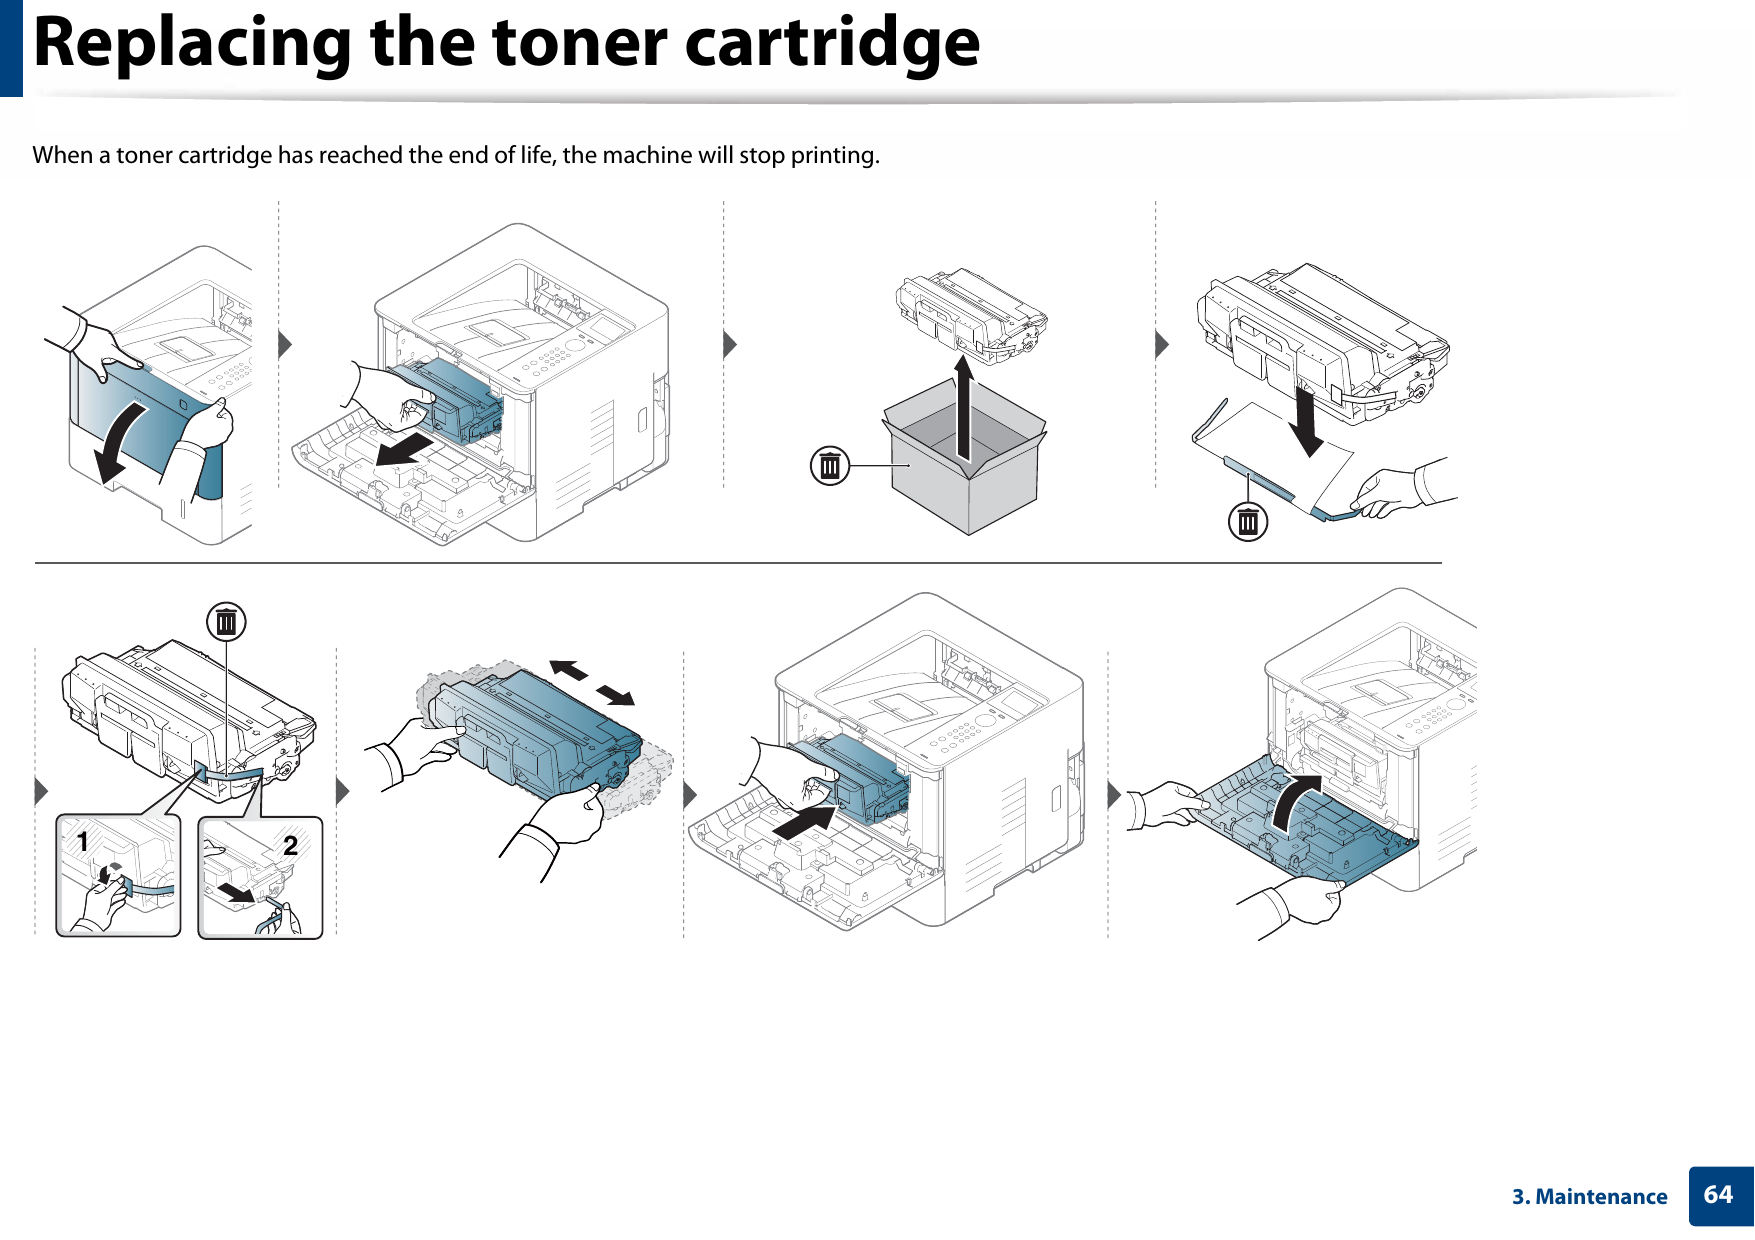 Replacing the toner cartridge643. MaintenanceWhen a toner cartridge has reached the end of life, the machine will stop printing.21